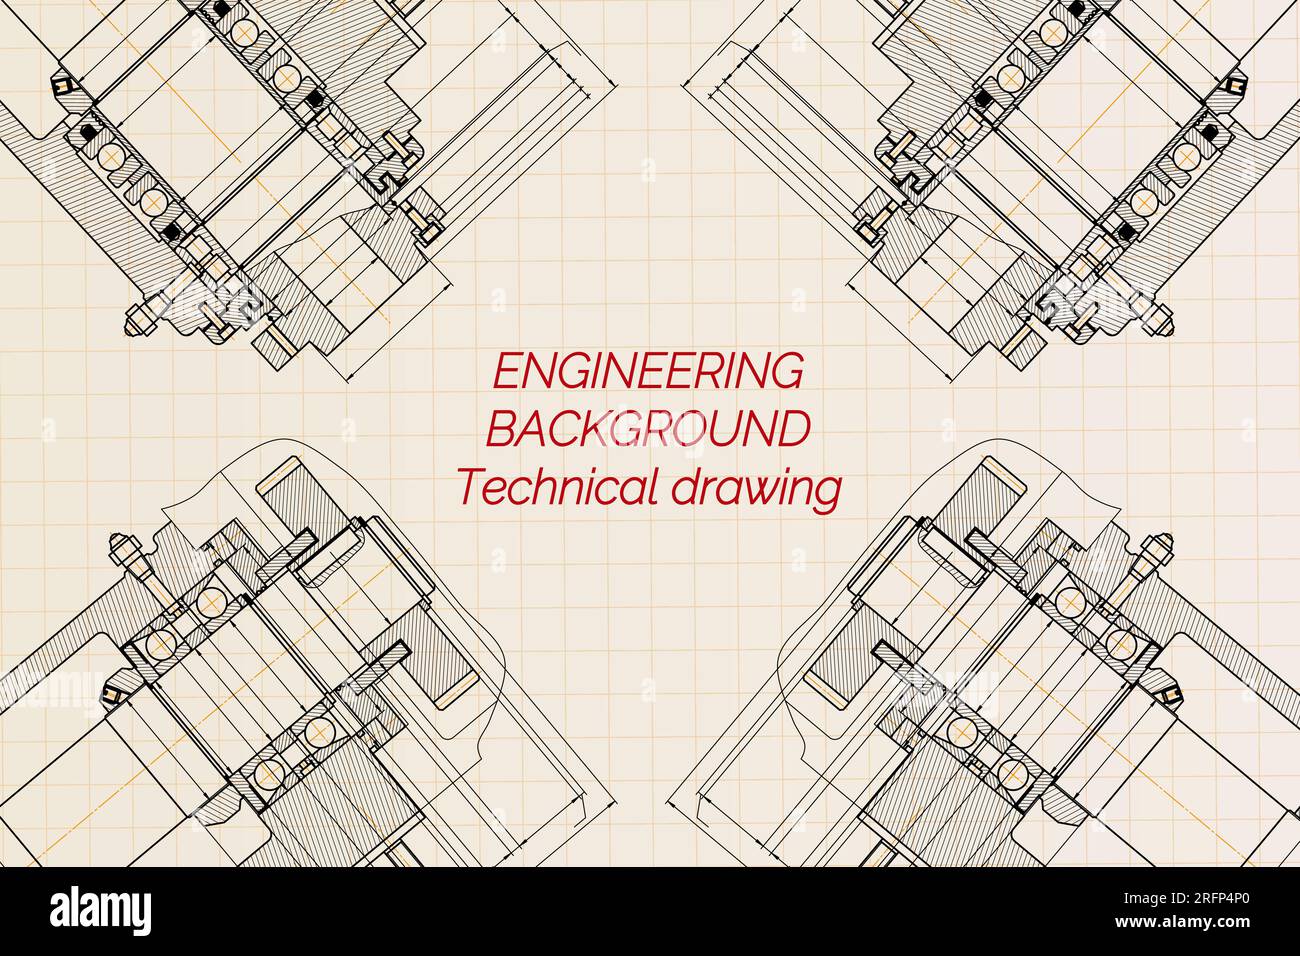 Technical drawing background .Mechanical Engineering drawing. Stock Vector